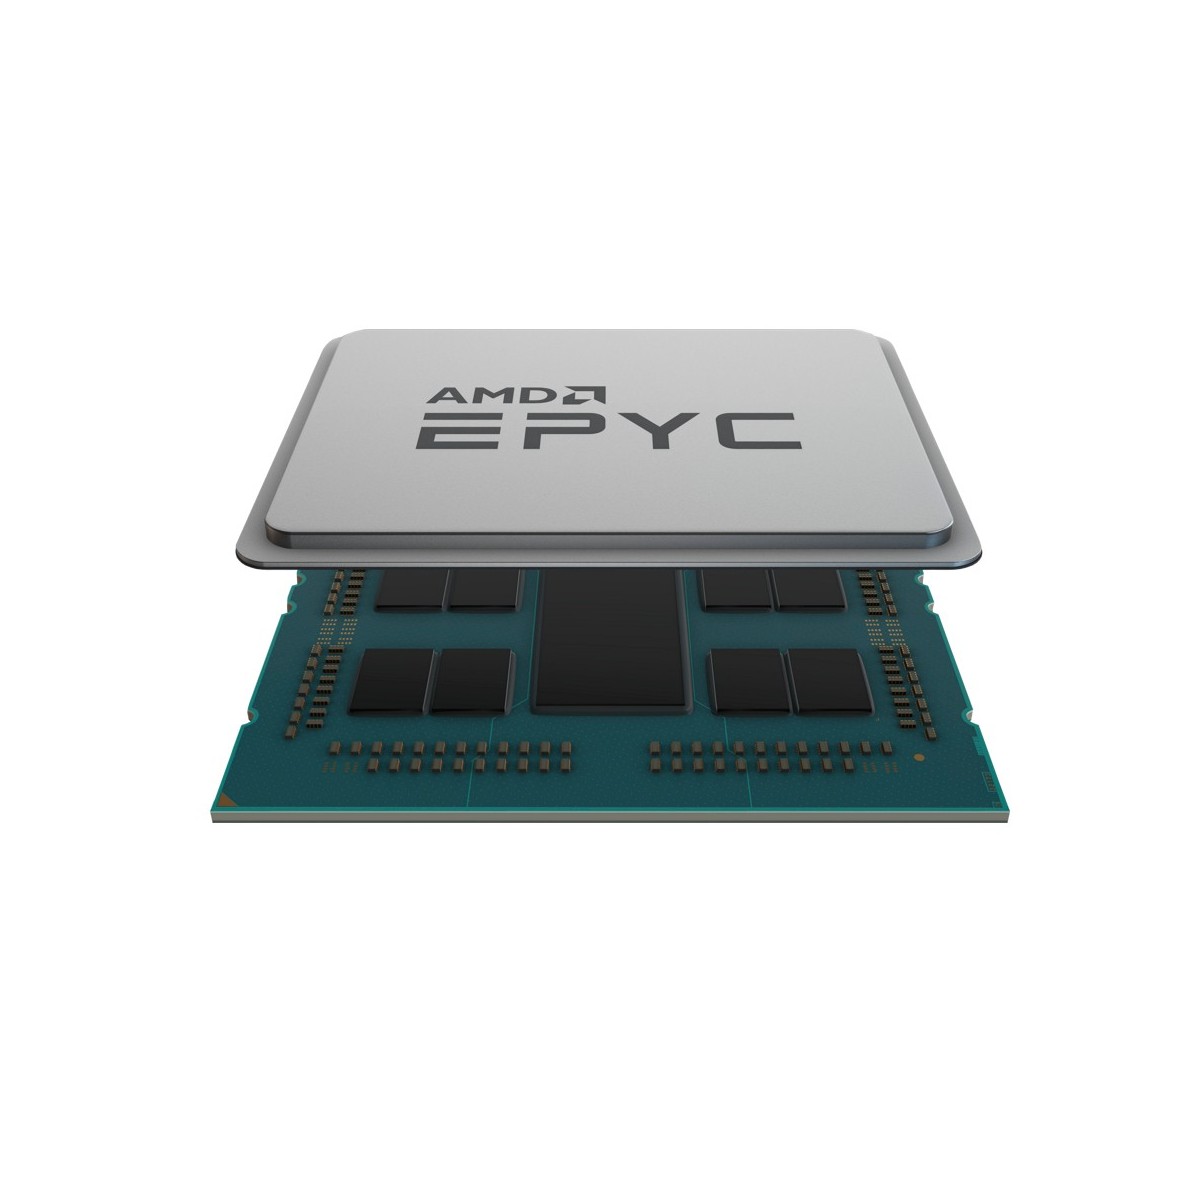 HPE Processor AMD EPYC 7443P 2.85GHz 24-core 200W for - 2.85 GHz